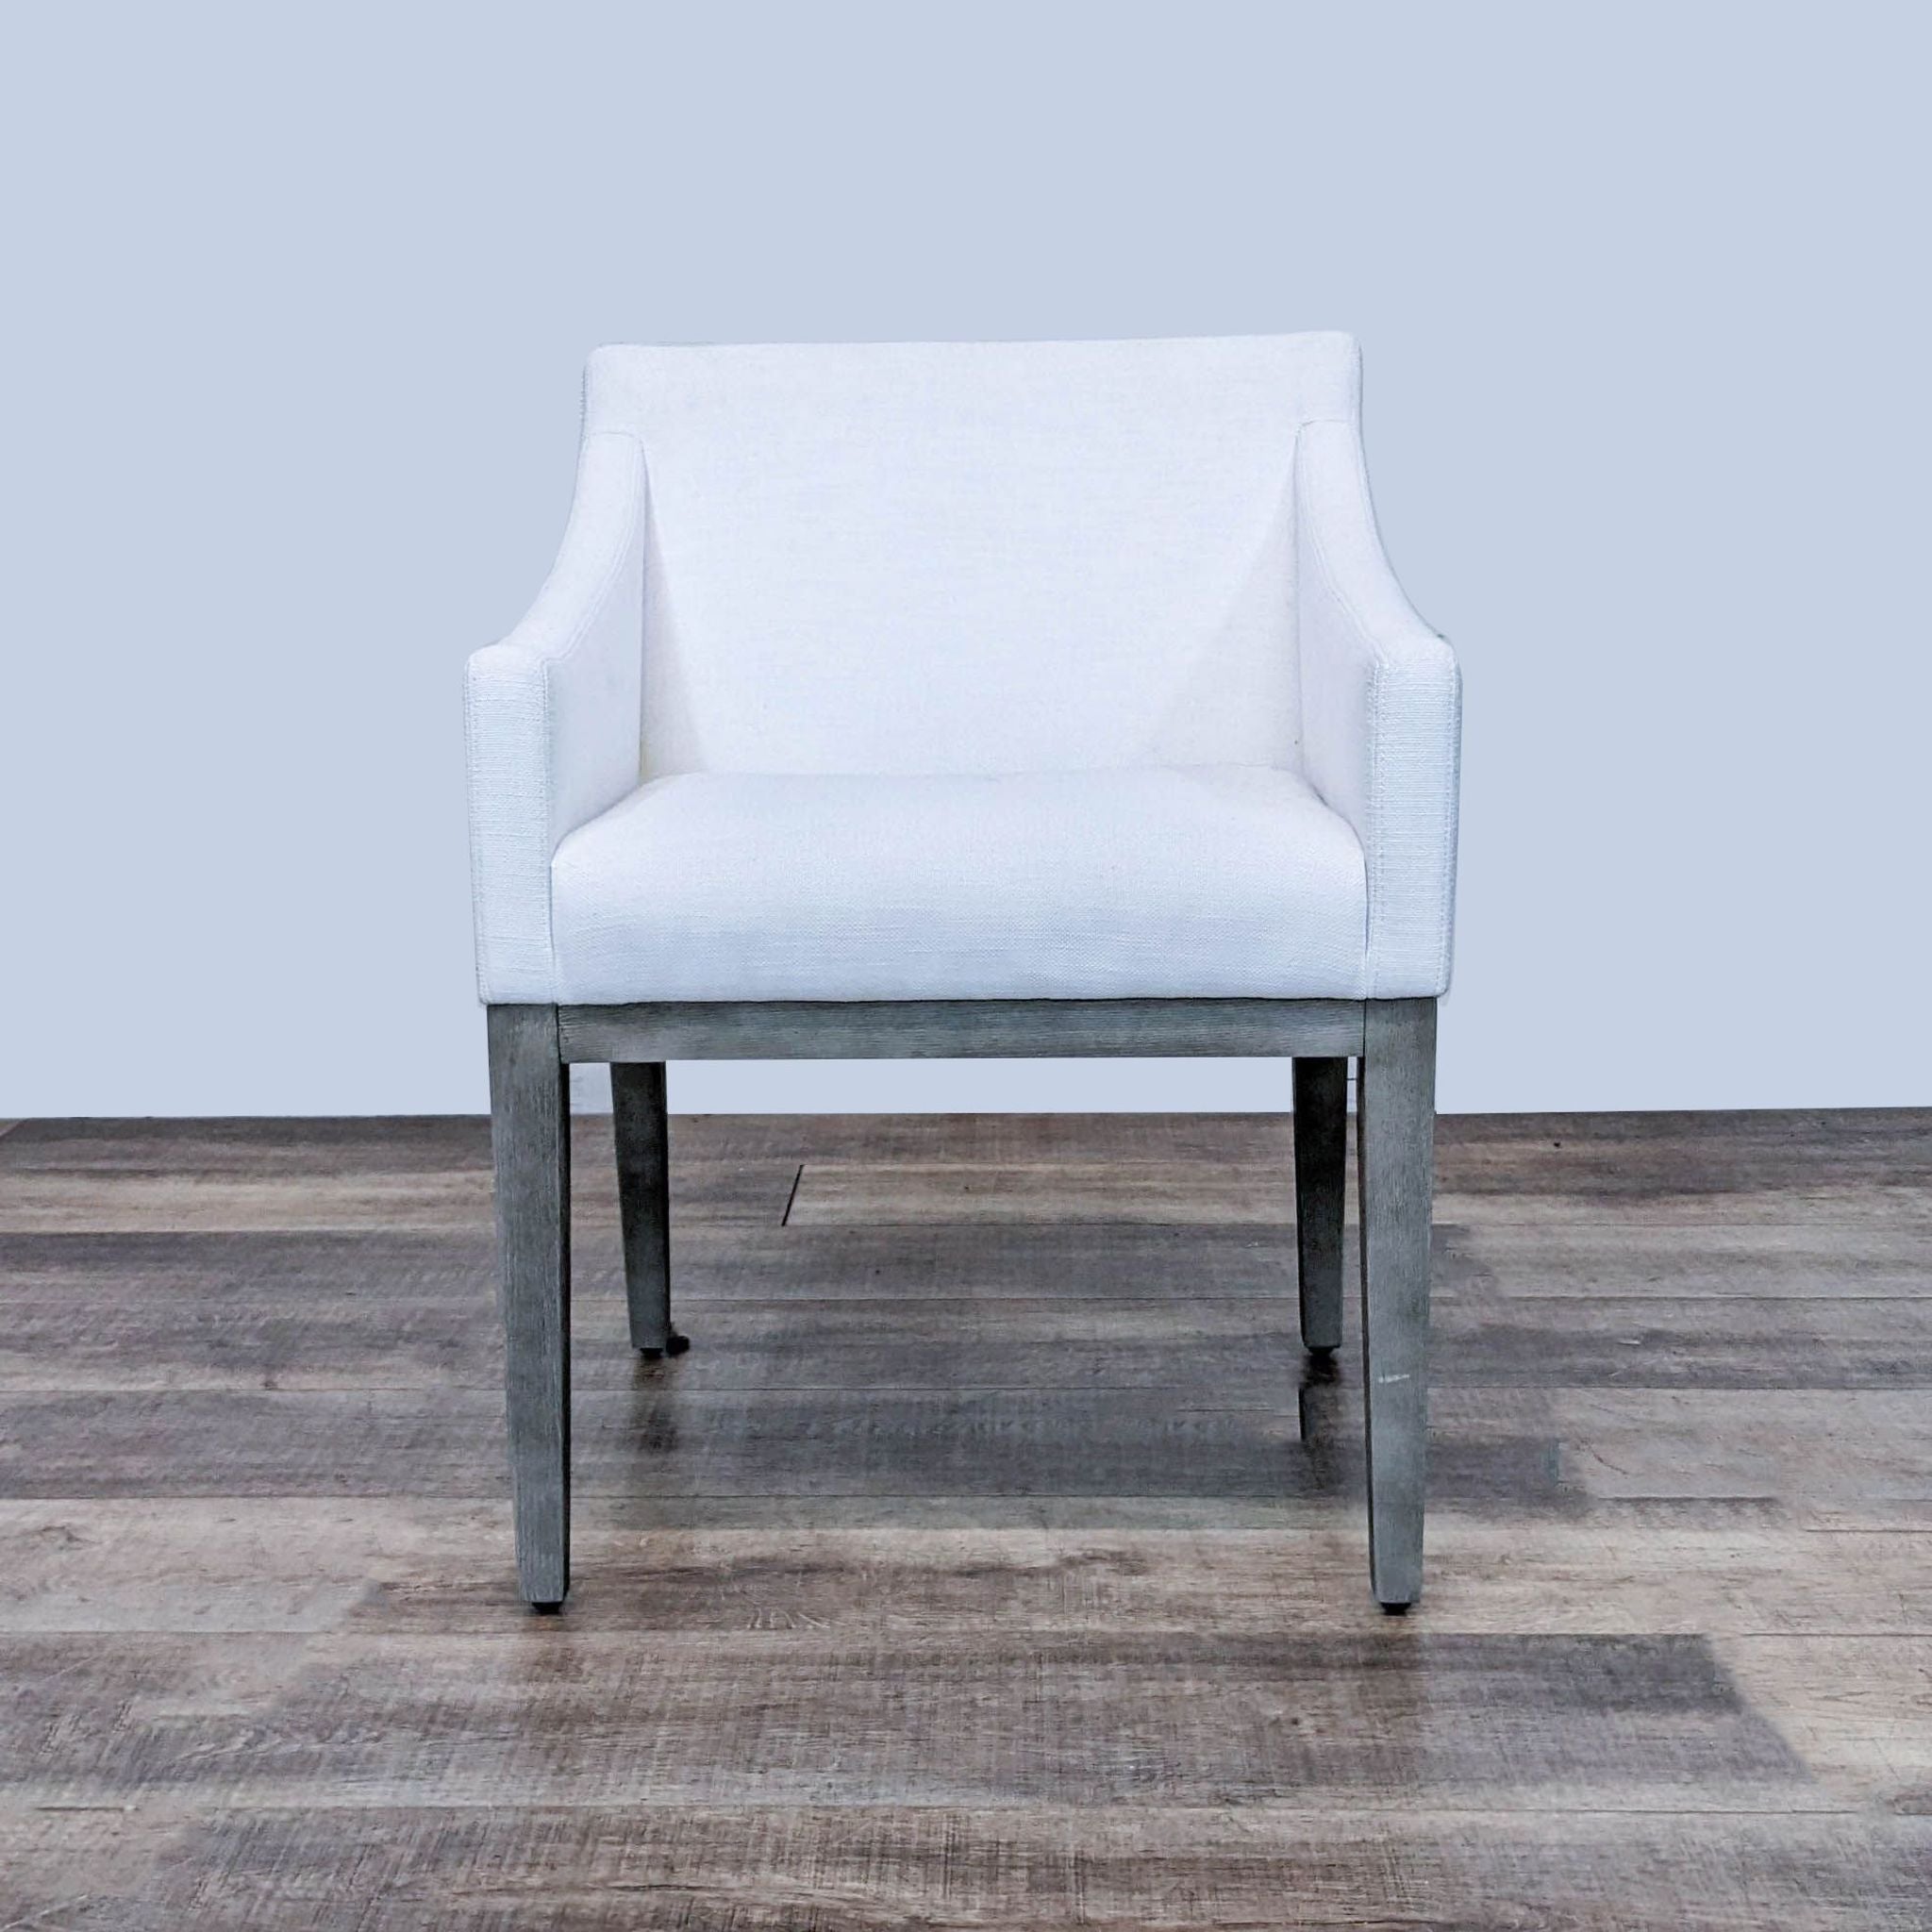 Restoration Hardware Morgan dining chair with midcentury design, angular silhouette, wooden frame, and white upholstery.